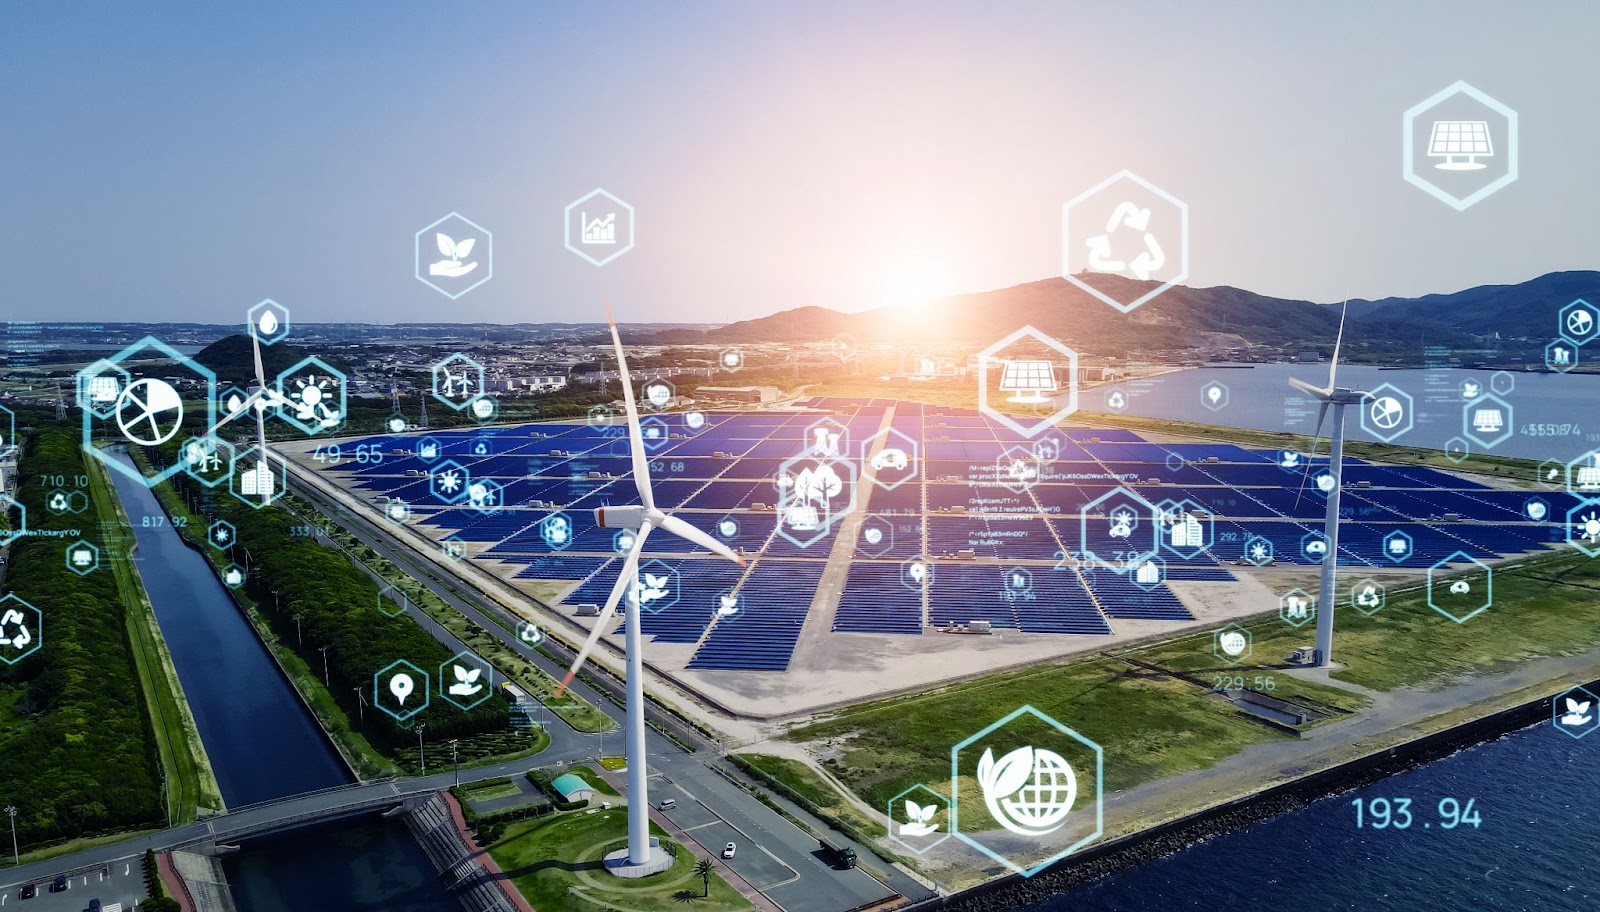 5 Solutions Leading Digital Transformation in the Energy Industry